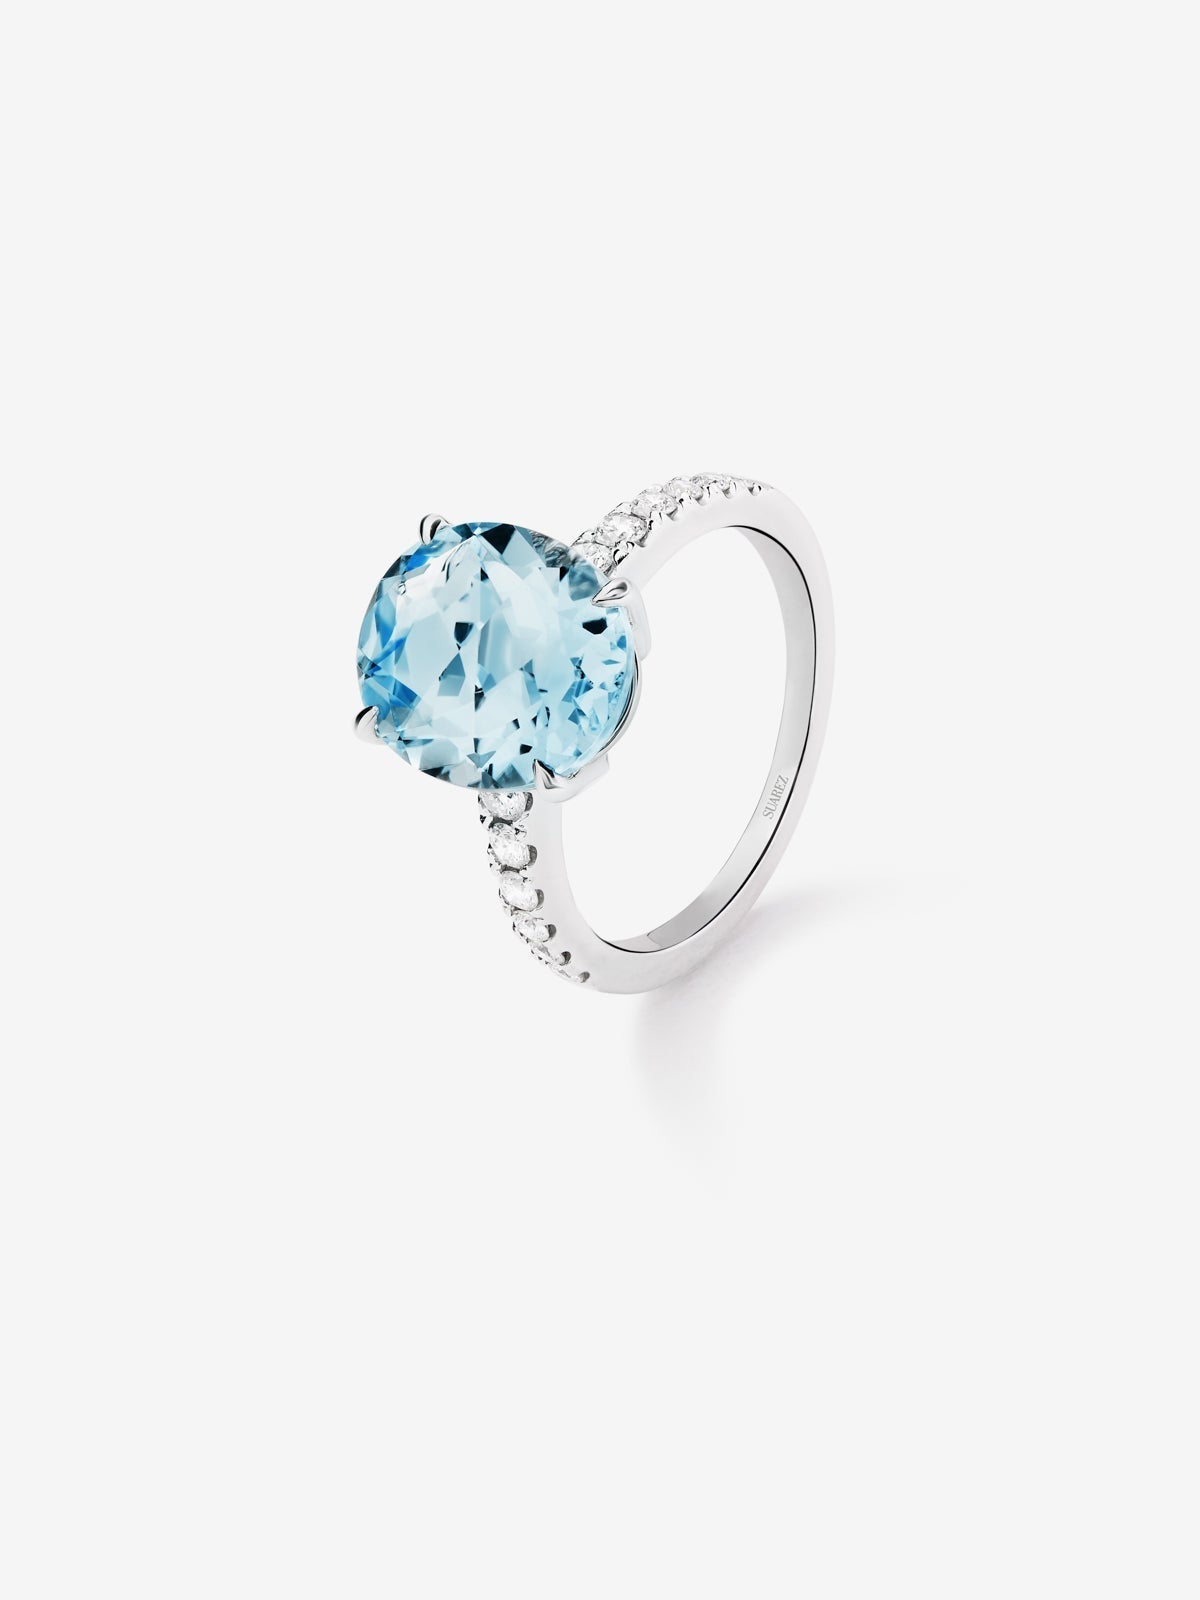 18K white gold ring with oval-cut sky blue topaz of 5.8 cts and 12 brilliant-cut diamonds with a total of 0.3 cts